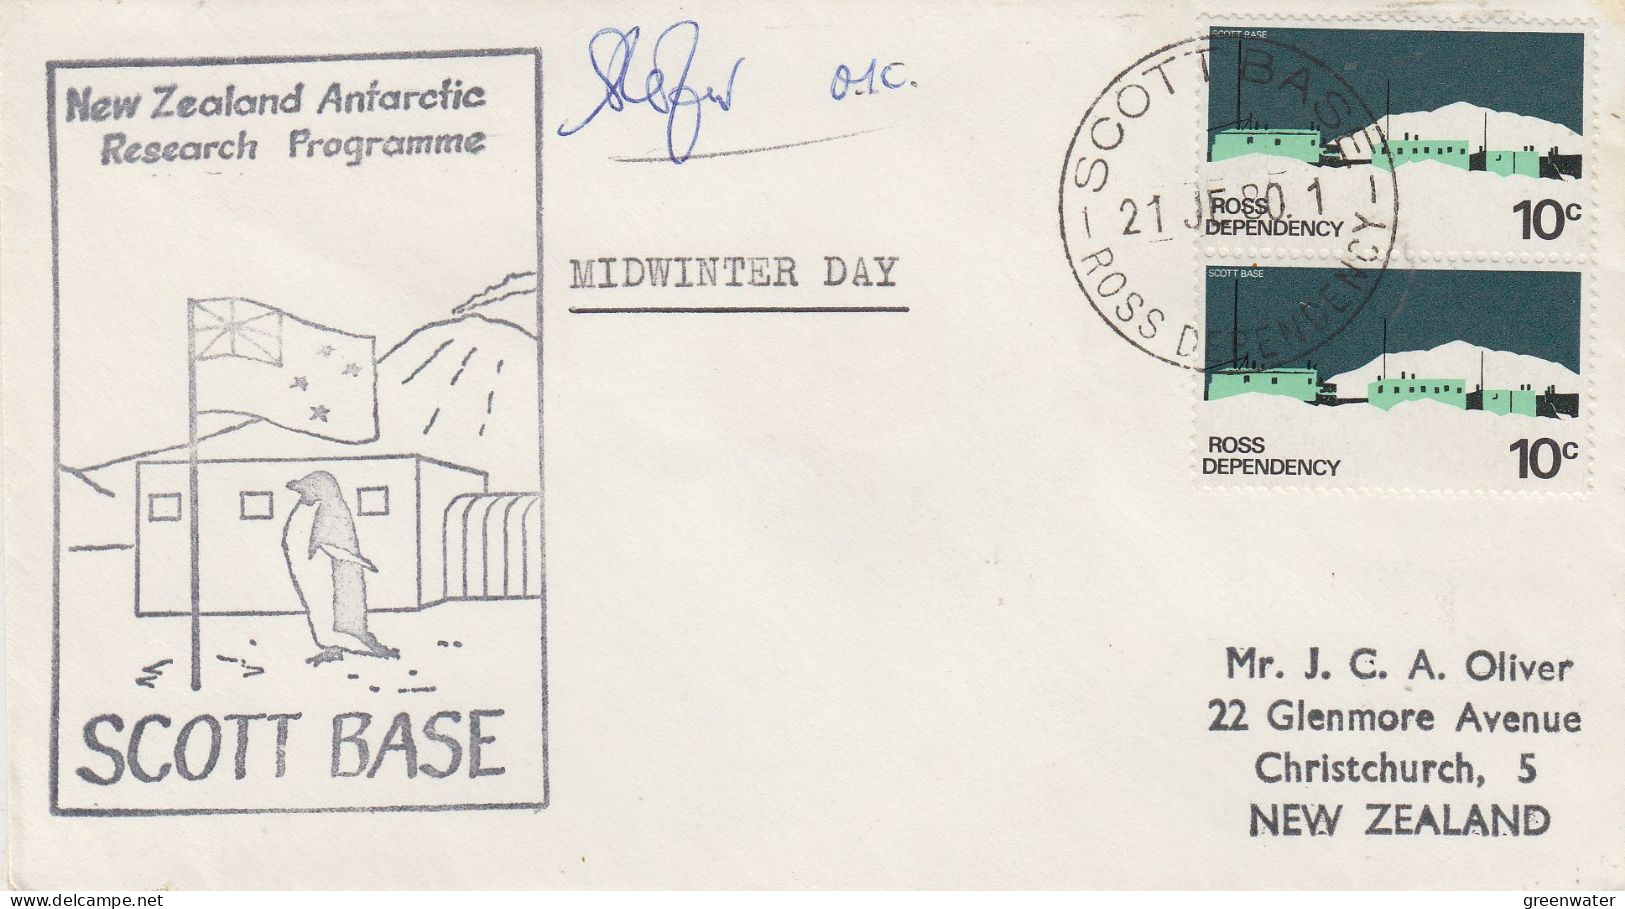 Ross Dependency NZ Research Programme Signature Midwinter Day  Ca Scott Base 21 DEC 1980 (SO167) - Lettres & Documents